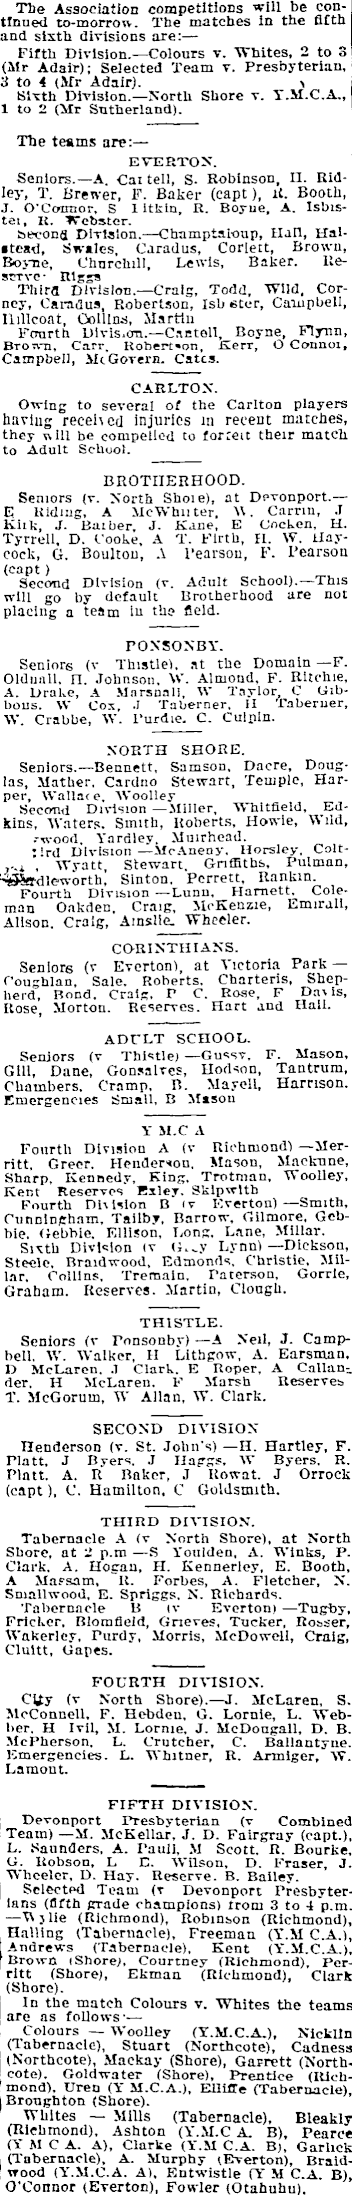 Papers Past Newspapers Auckland Star 15 August 1913 Association Game